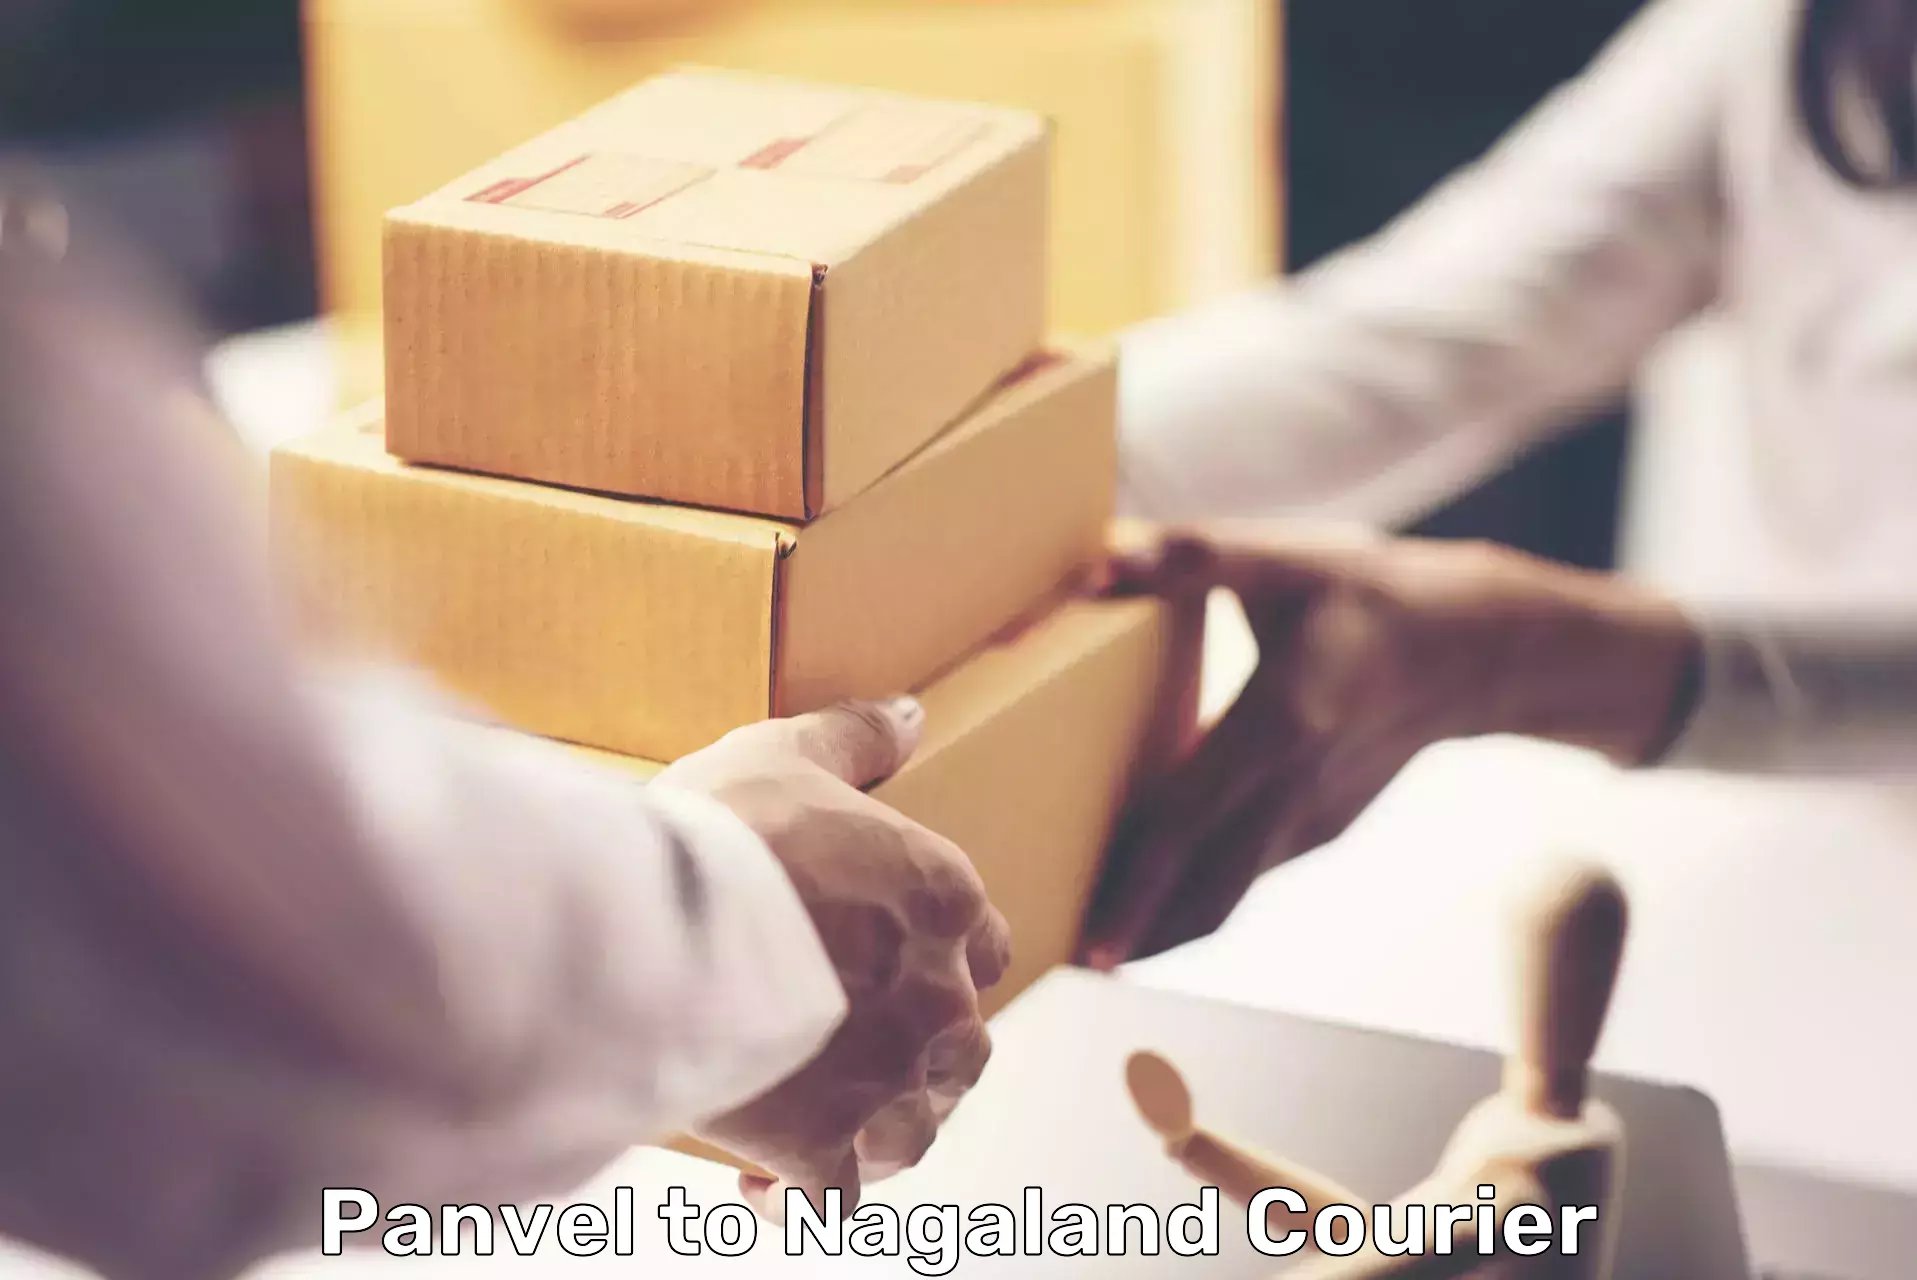 State-of-the-art courier technology Panvel to Dimapur